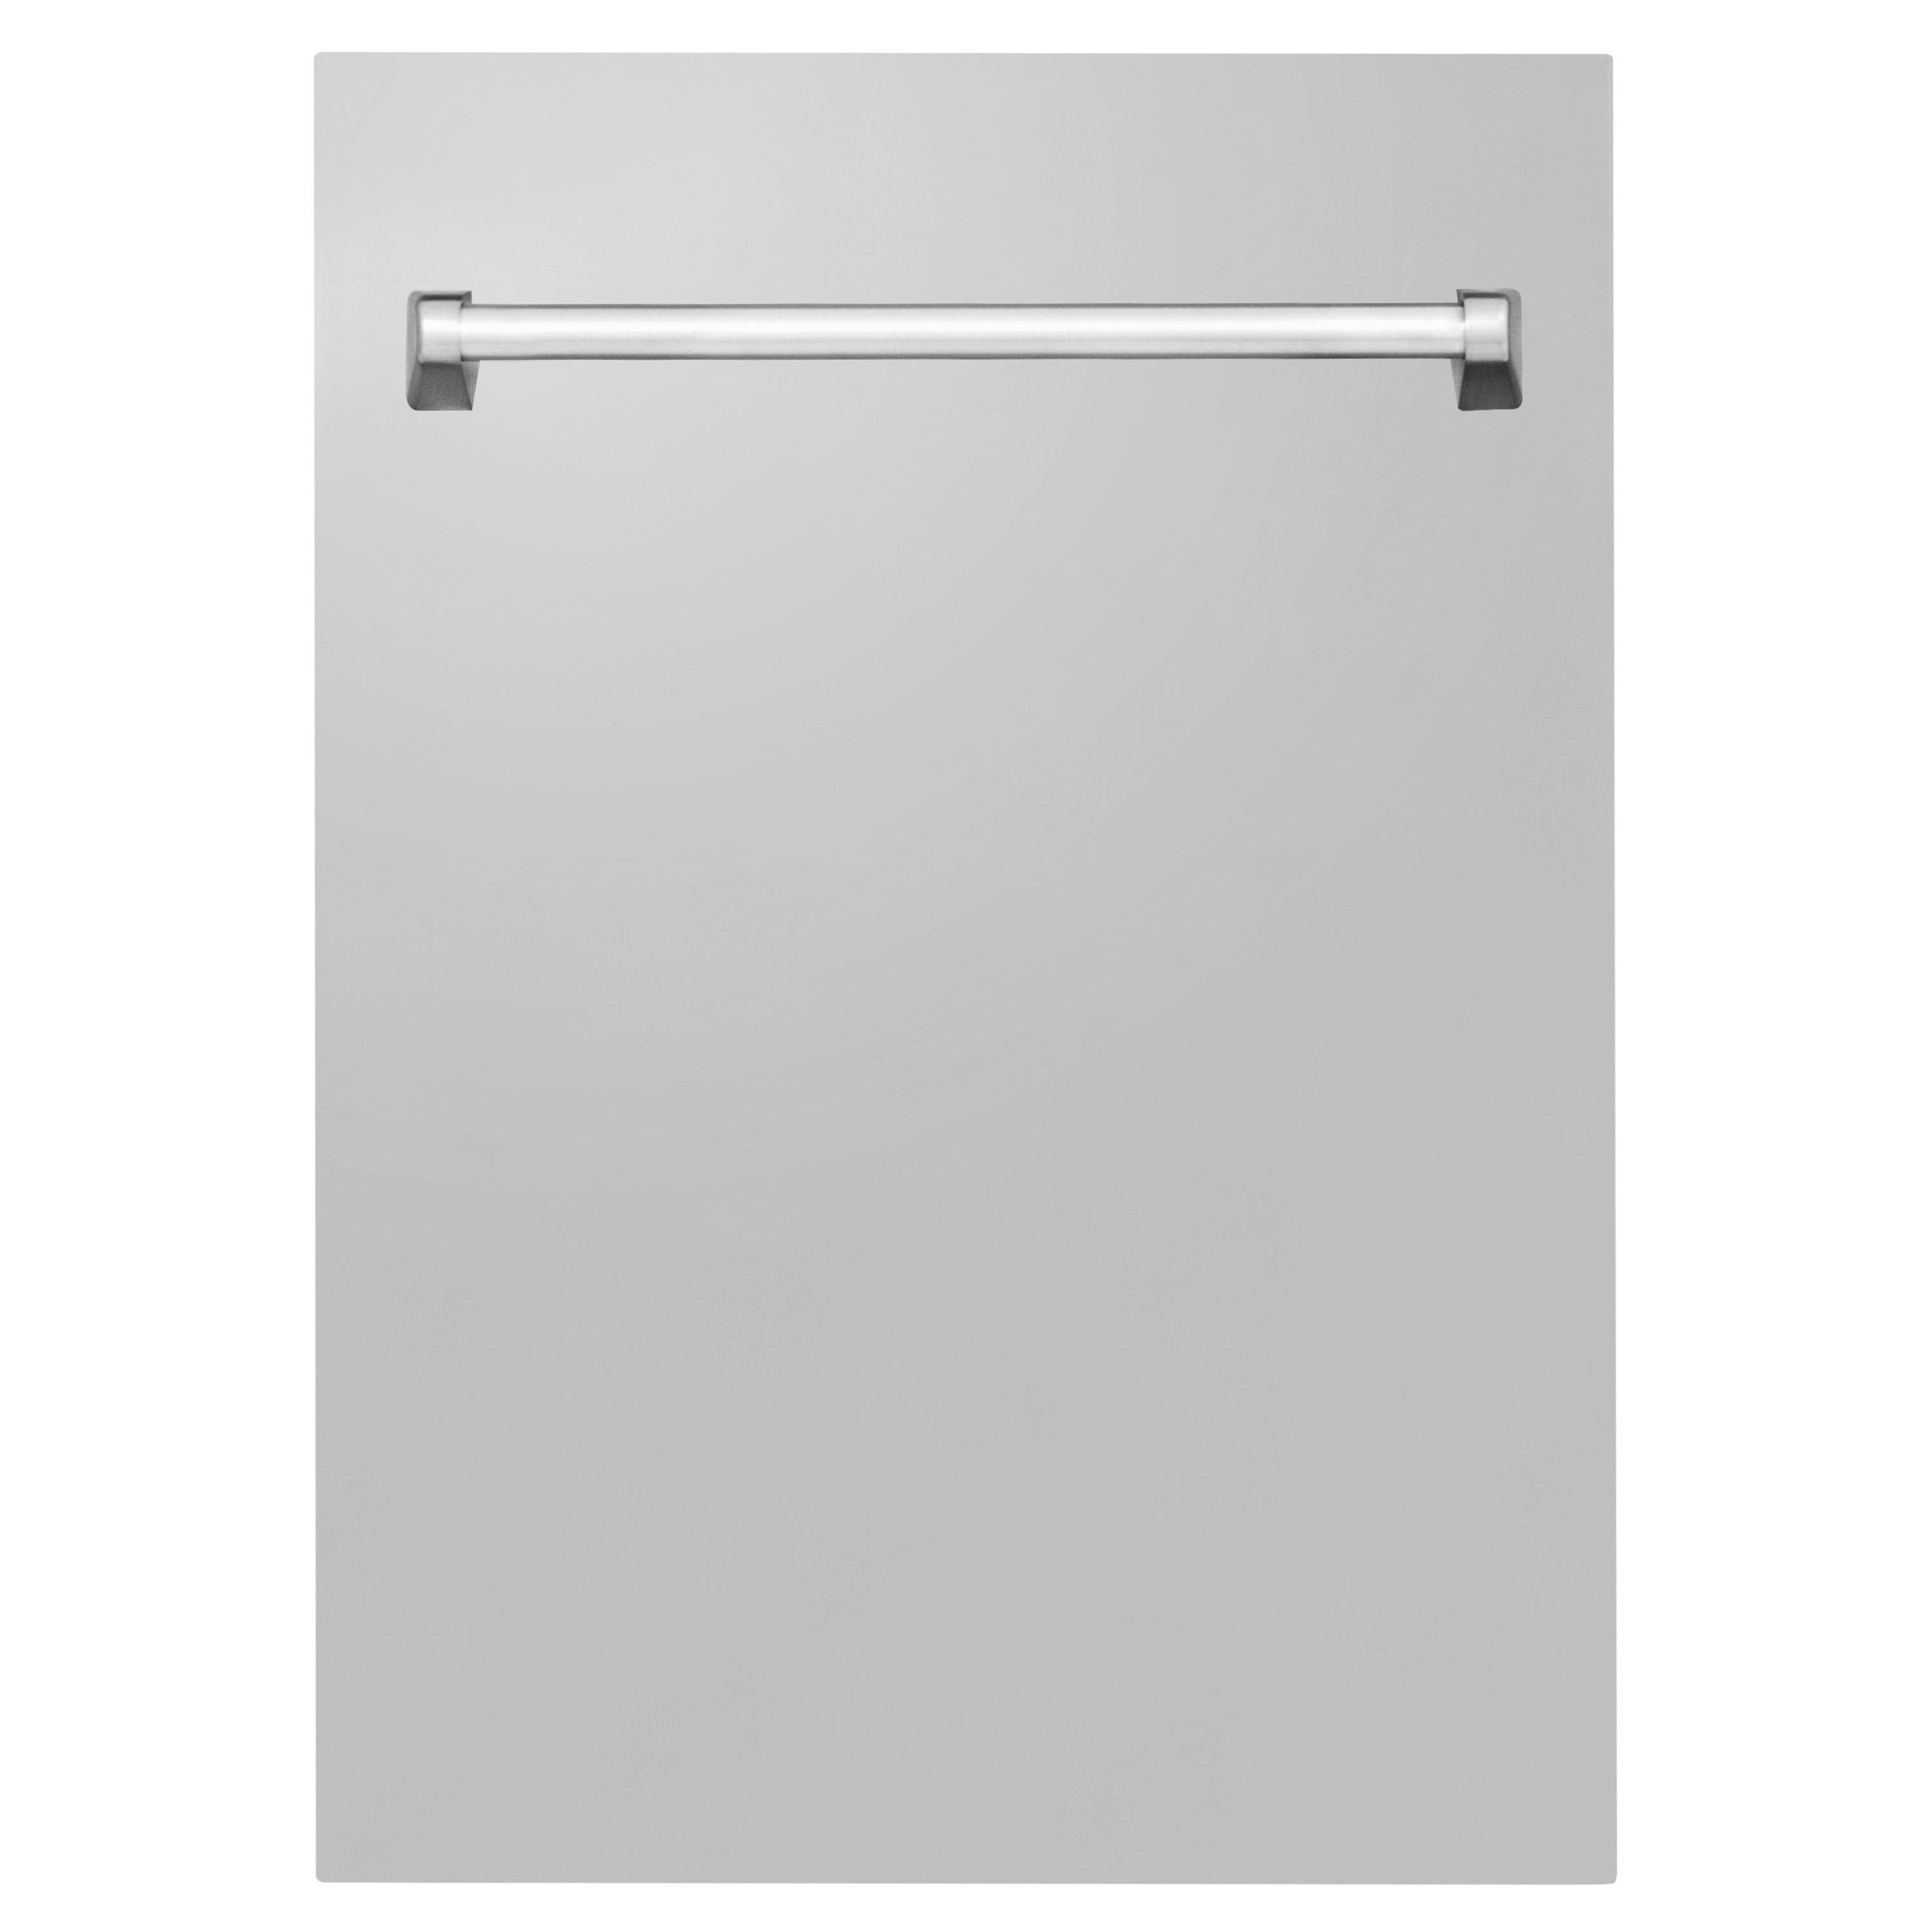 ZLINE 18" Tallac Dishwasher Panel in Stainless Steel with Traditional Handle (DPV-304-18)